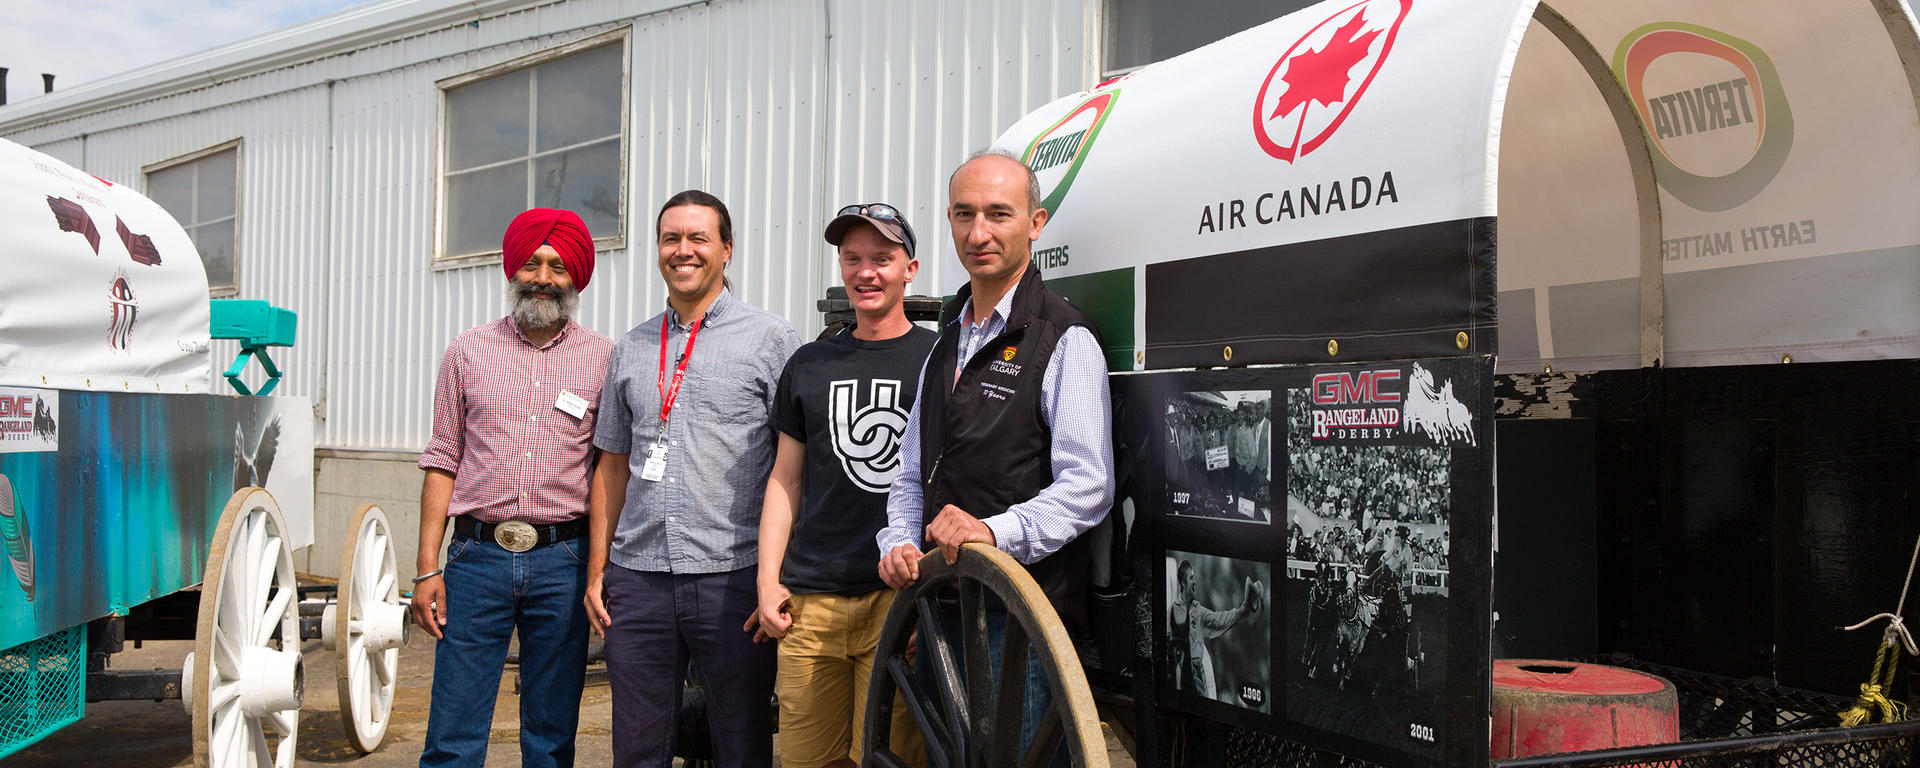 Baljit Singh, dean of the Faculty of Veterinary Medicine at the University of Calgary, meets behind the chuckwagon barns at the Calgary Stampede with professor Mark Ungrin, engineering student Sam Pollock and Renaud Leguillette. Photo by Riley Brandt, University of Calgary